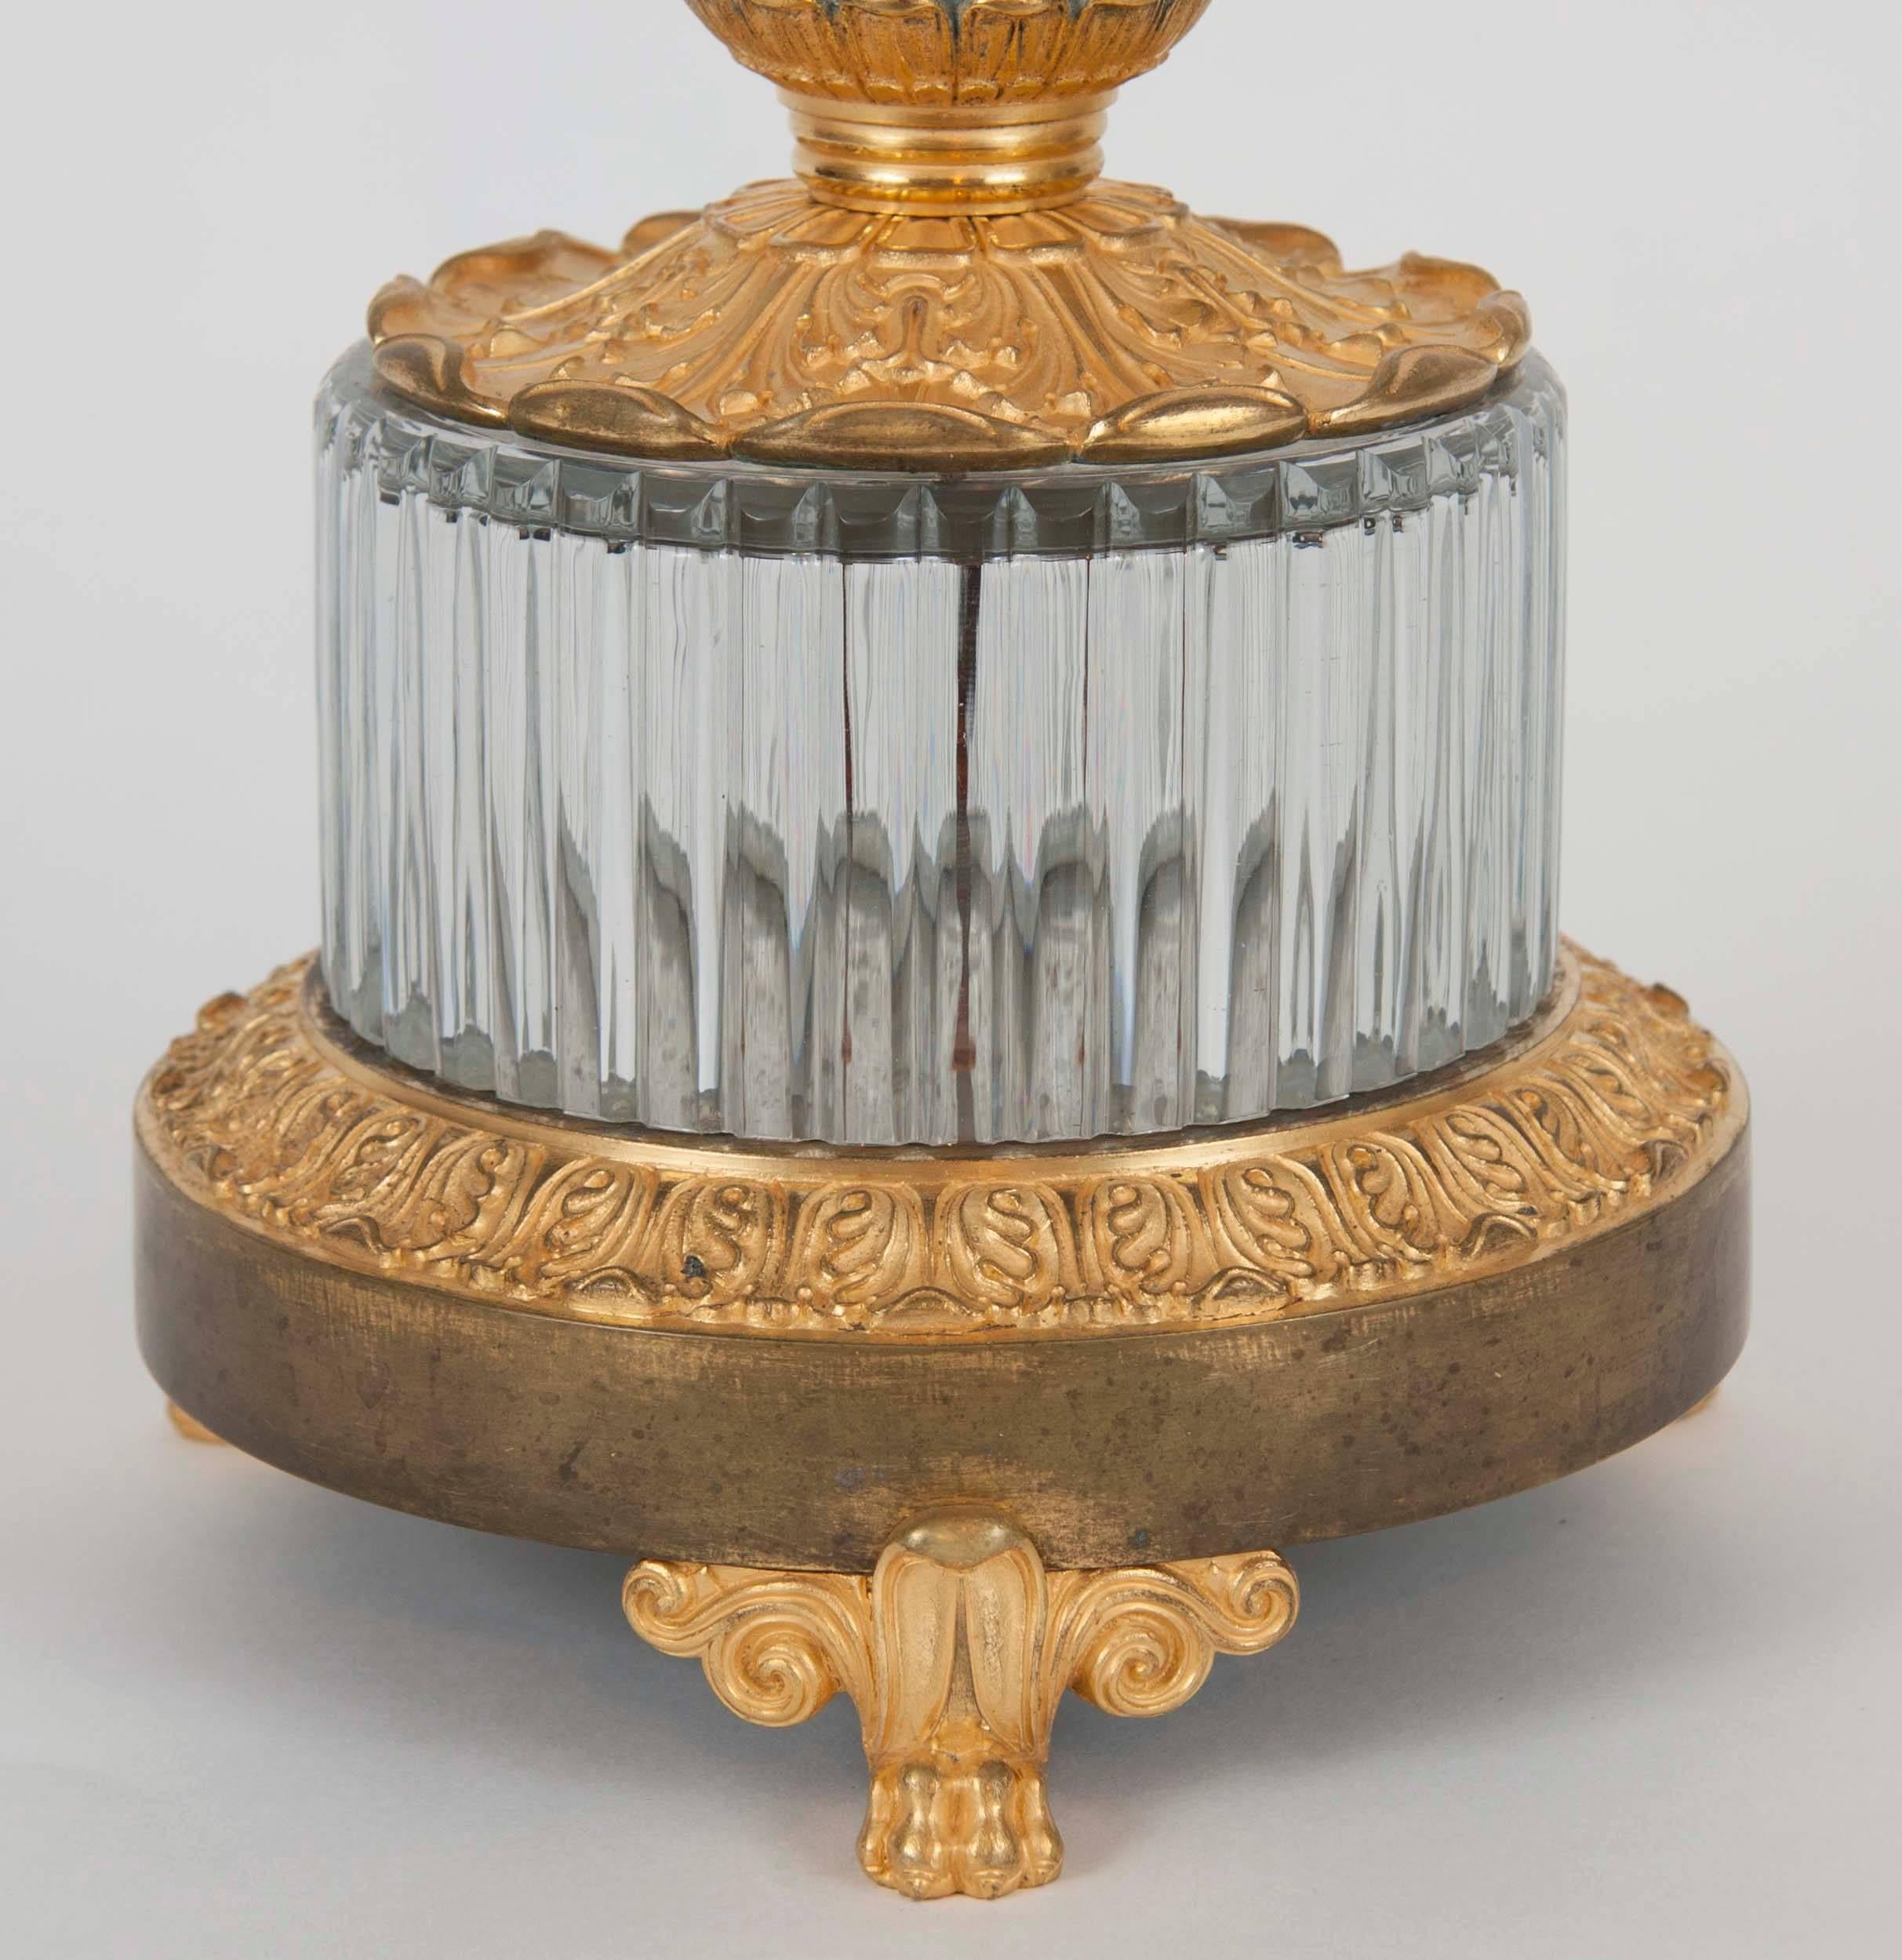 Cut-glass centerpiece with gilt bronze mounts. Hair line crack in bowl.